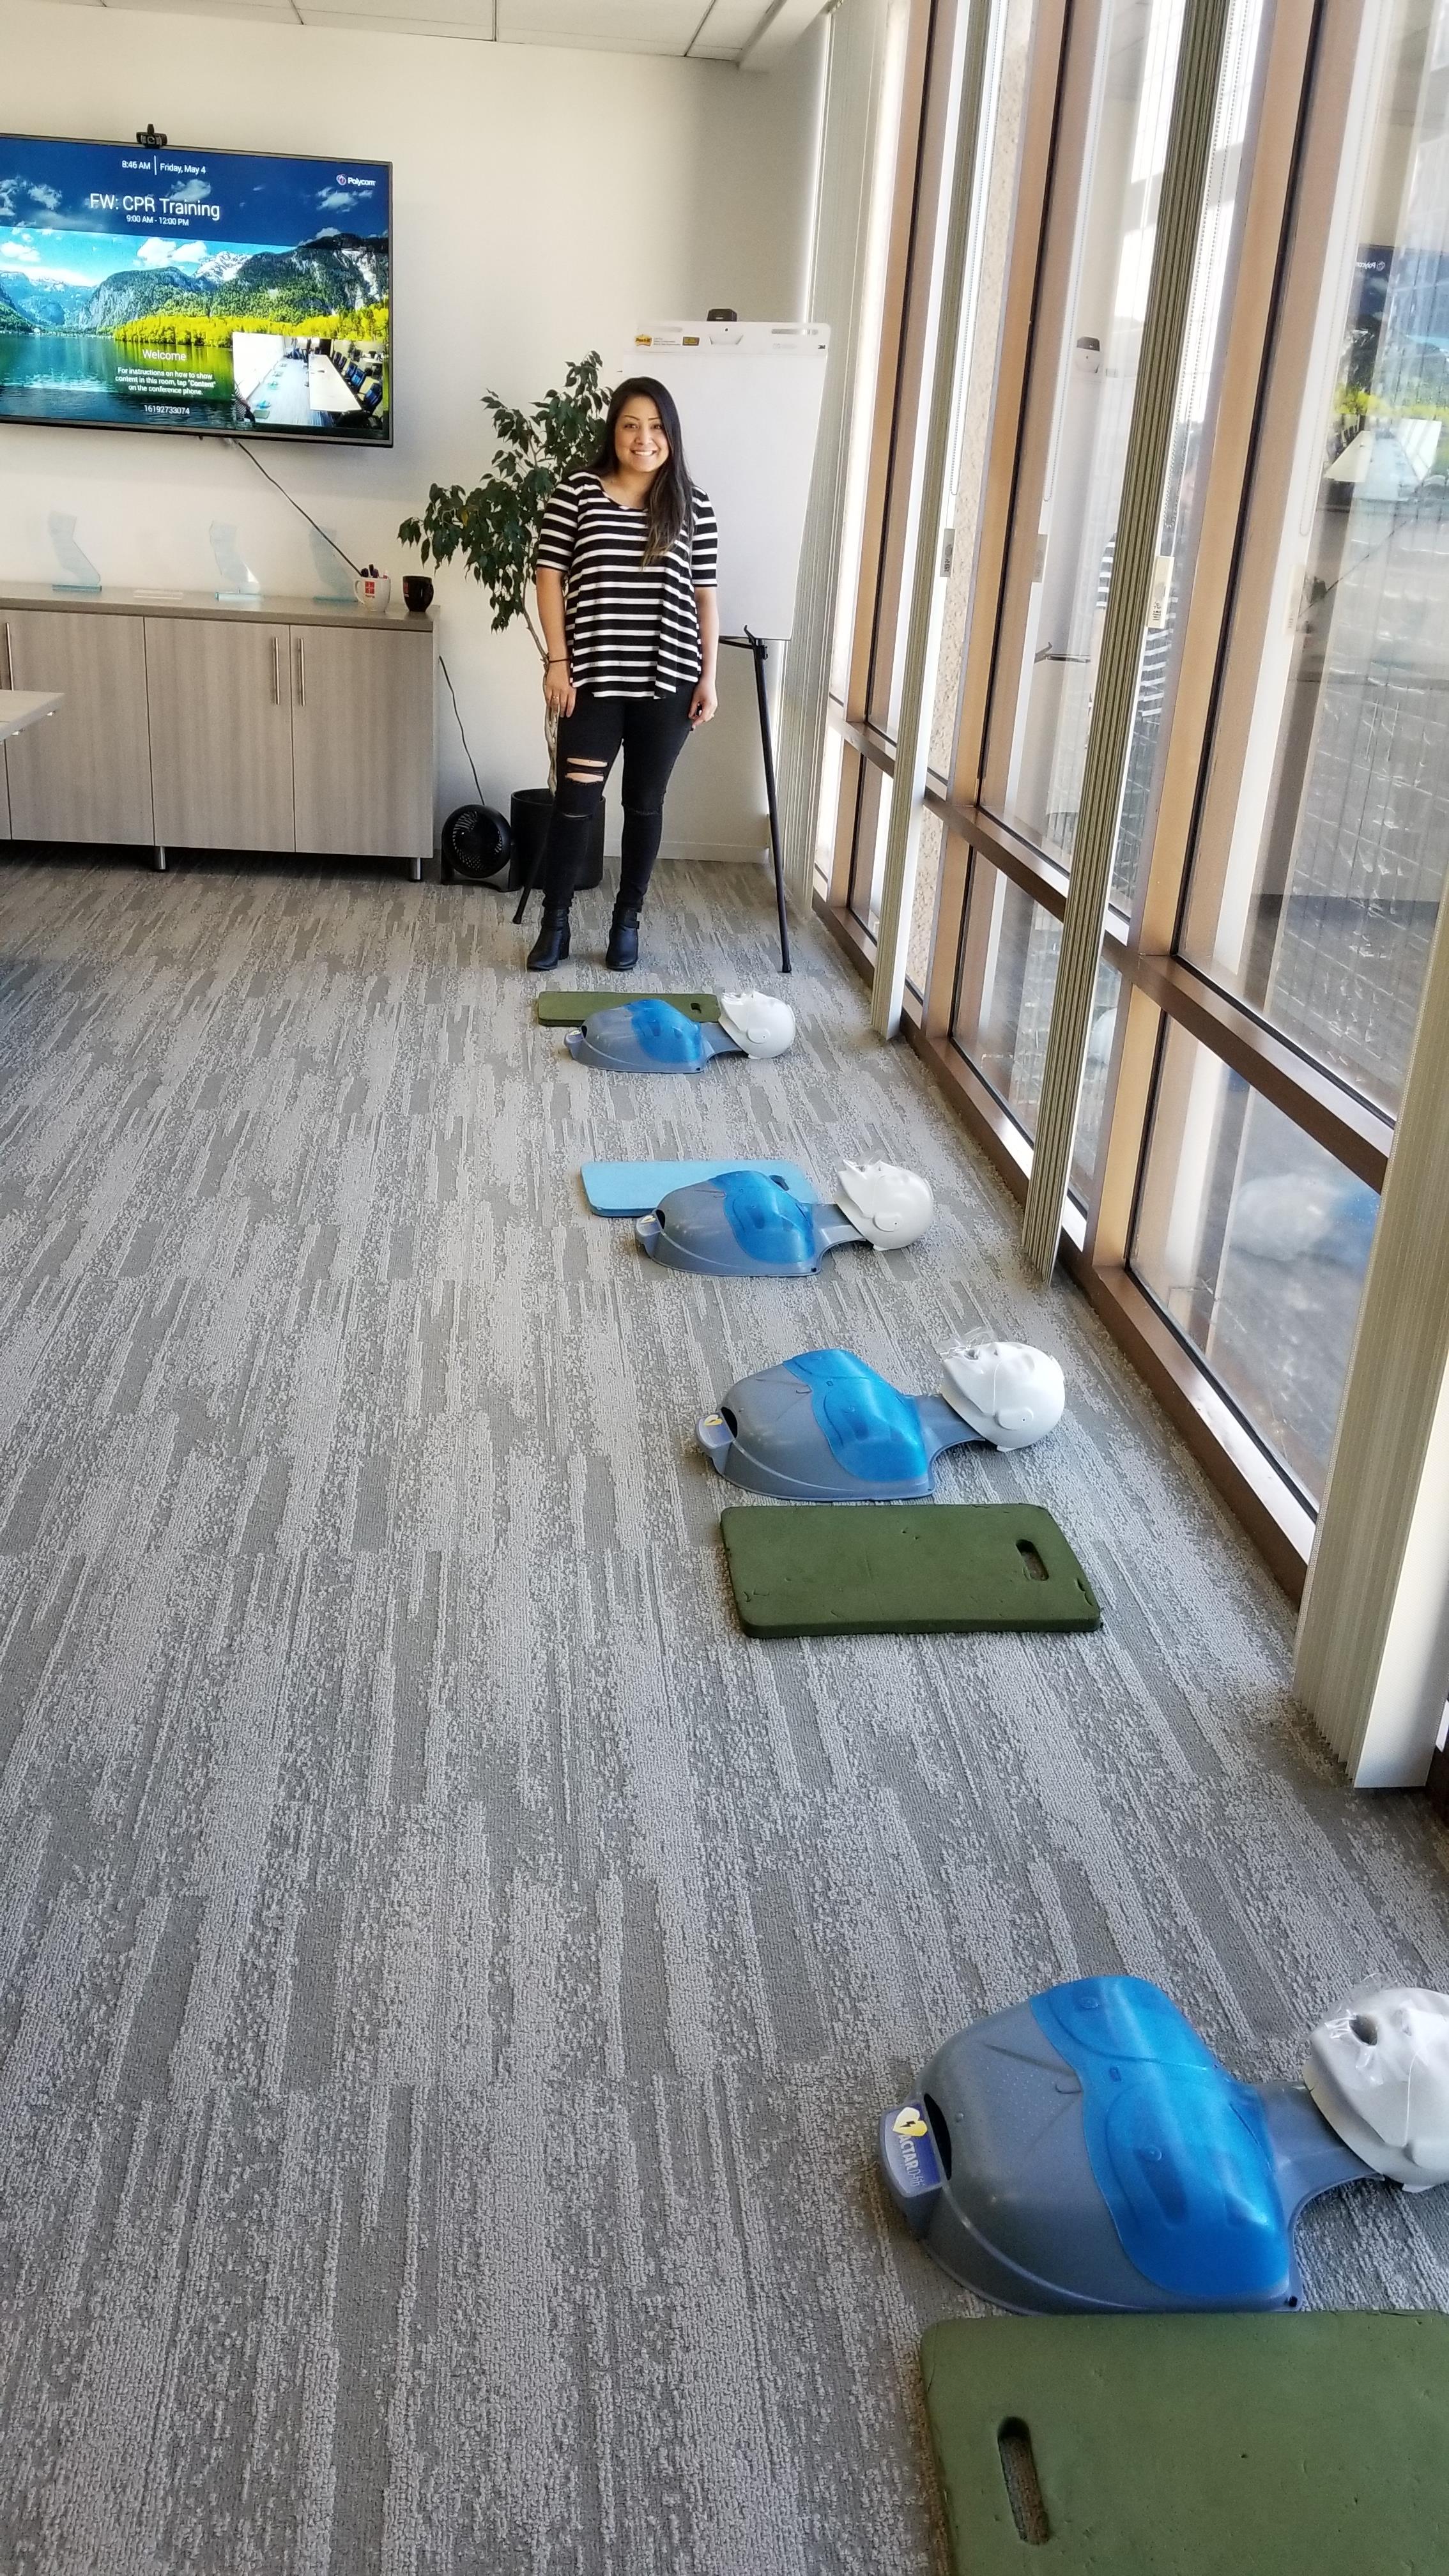 Harris employee setting up for CPR/AED training.